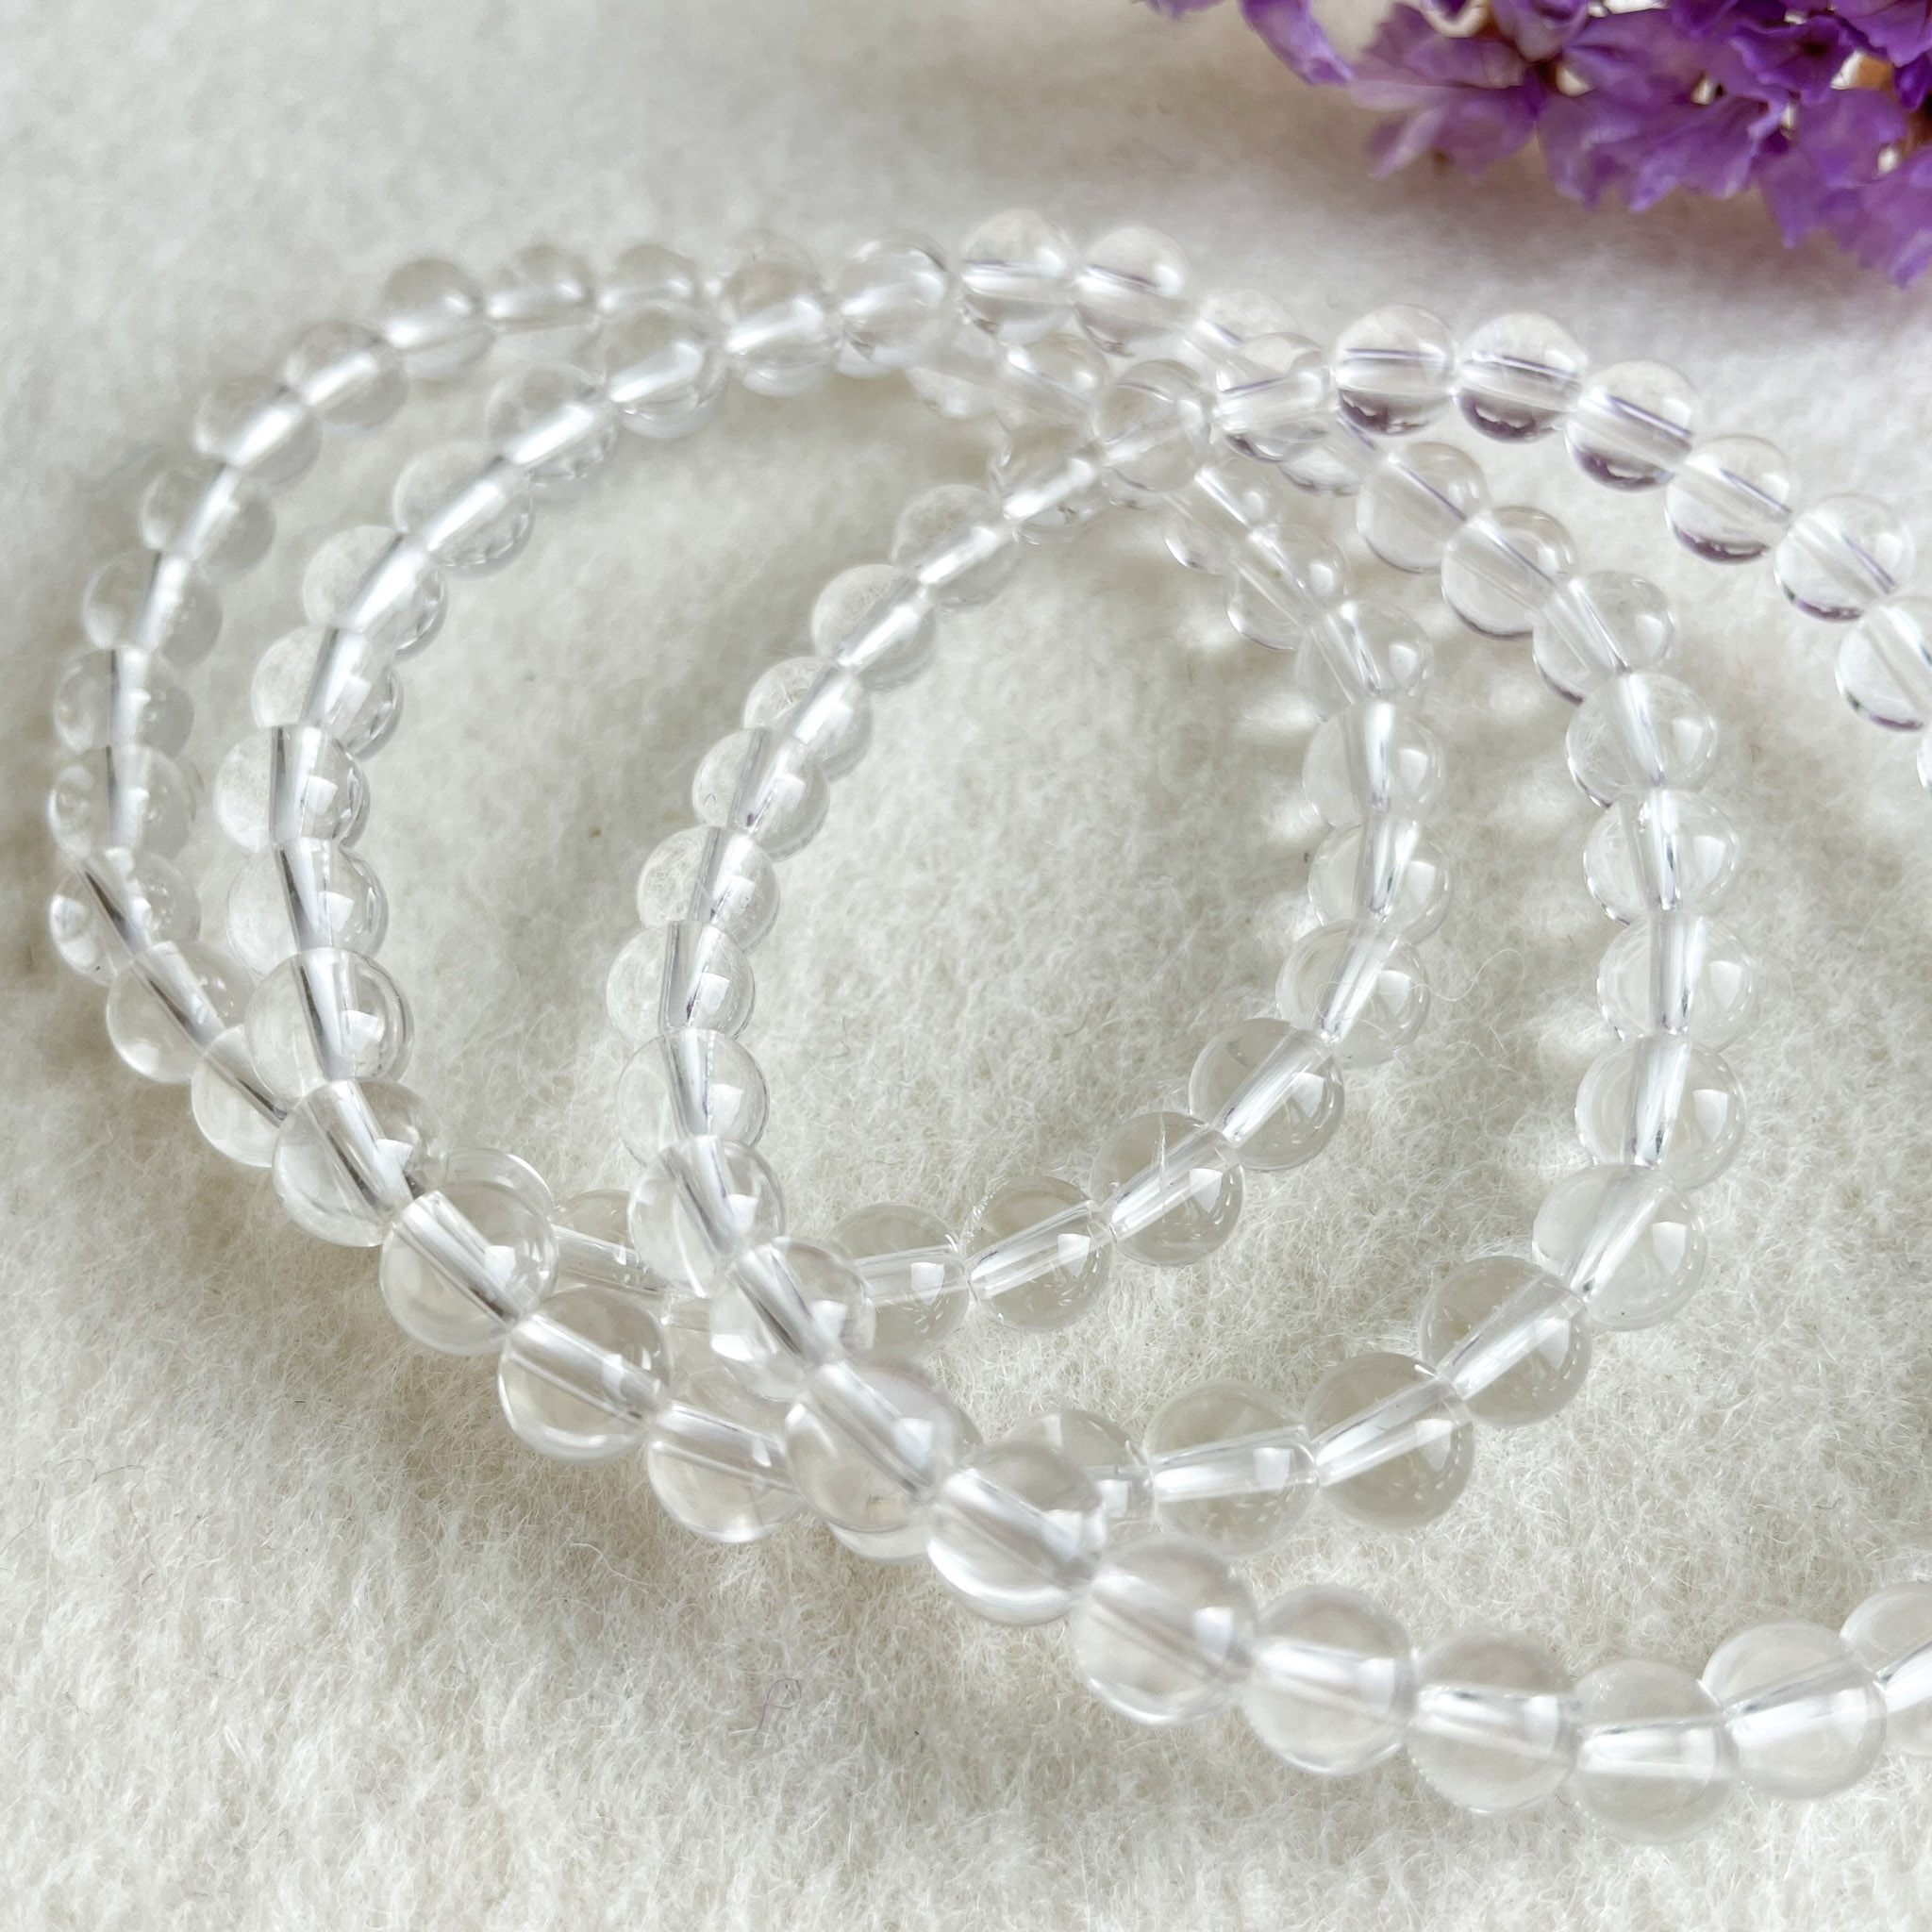 Three strands of clear glass beads on a white surface with a hint of purple flowers in the top right corner.